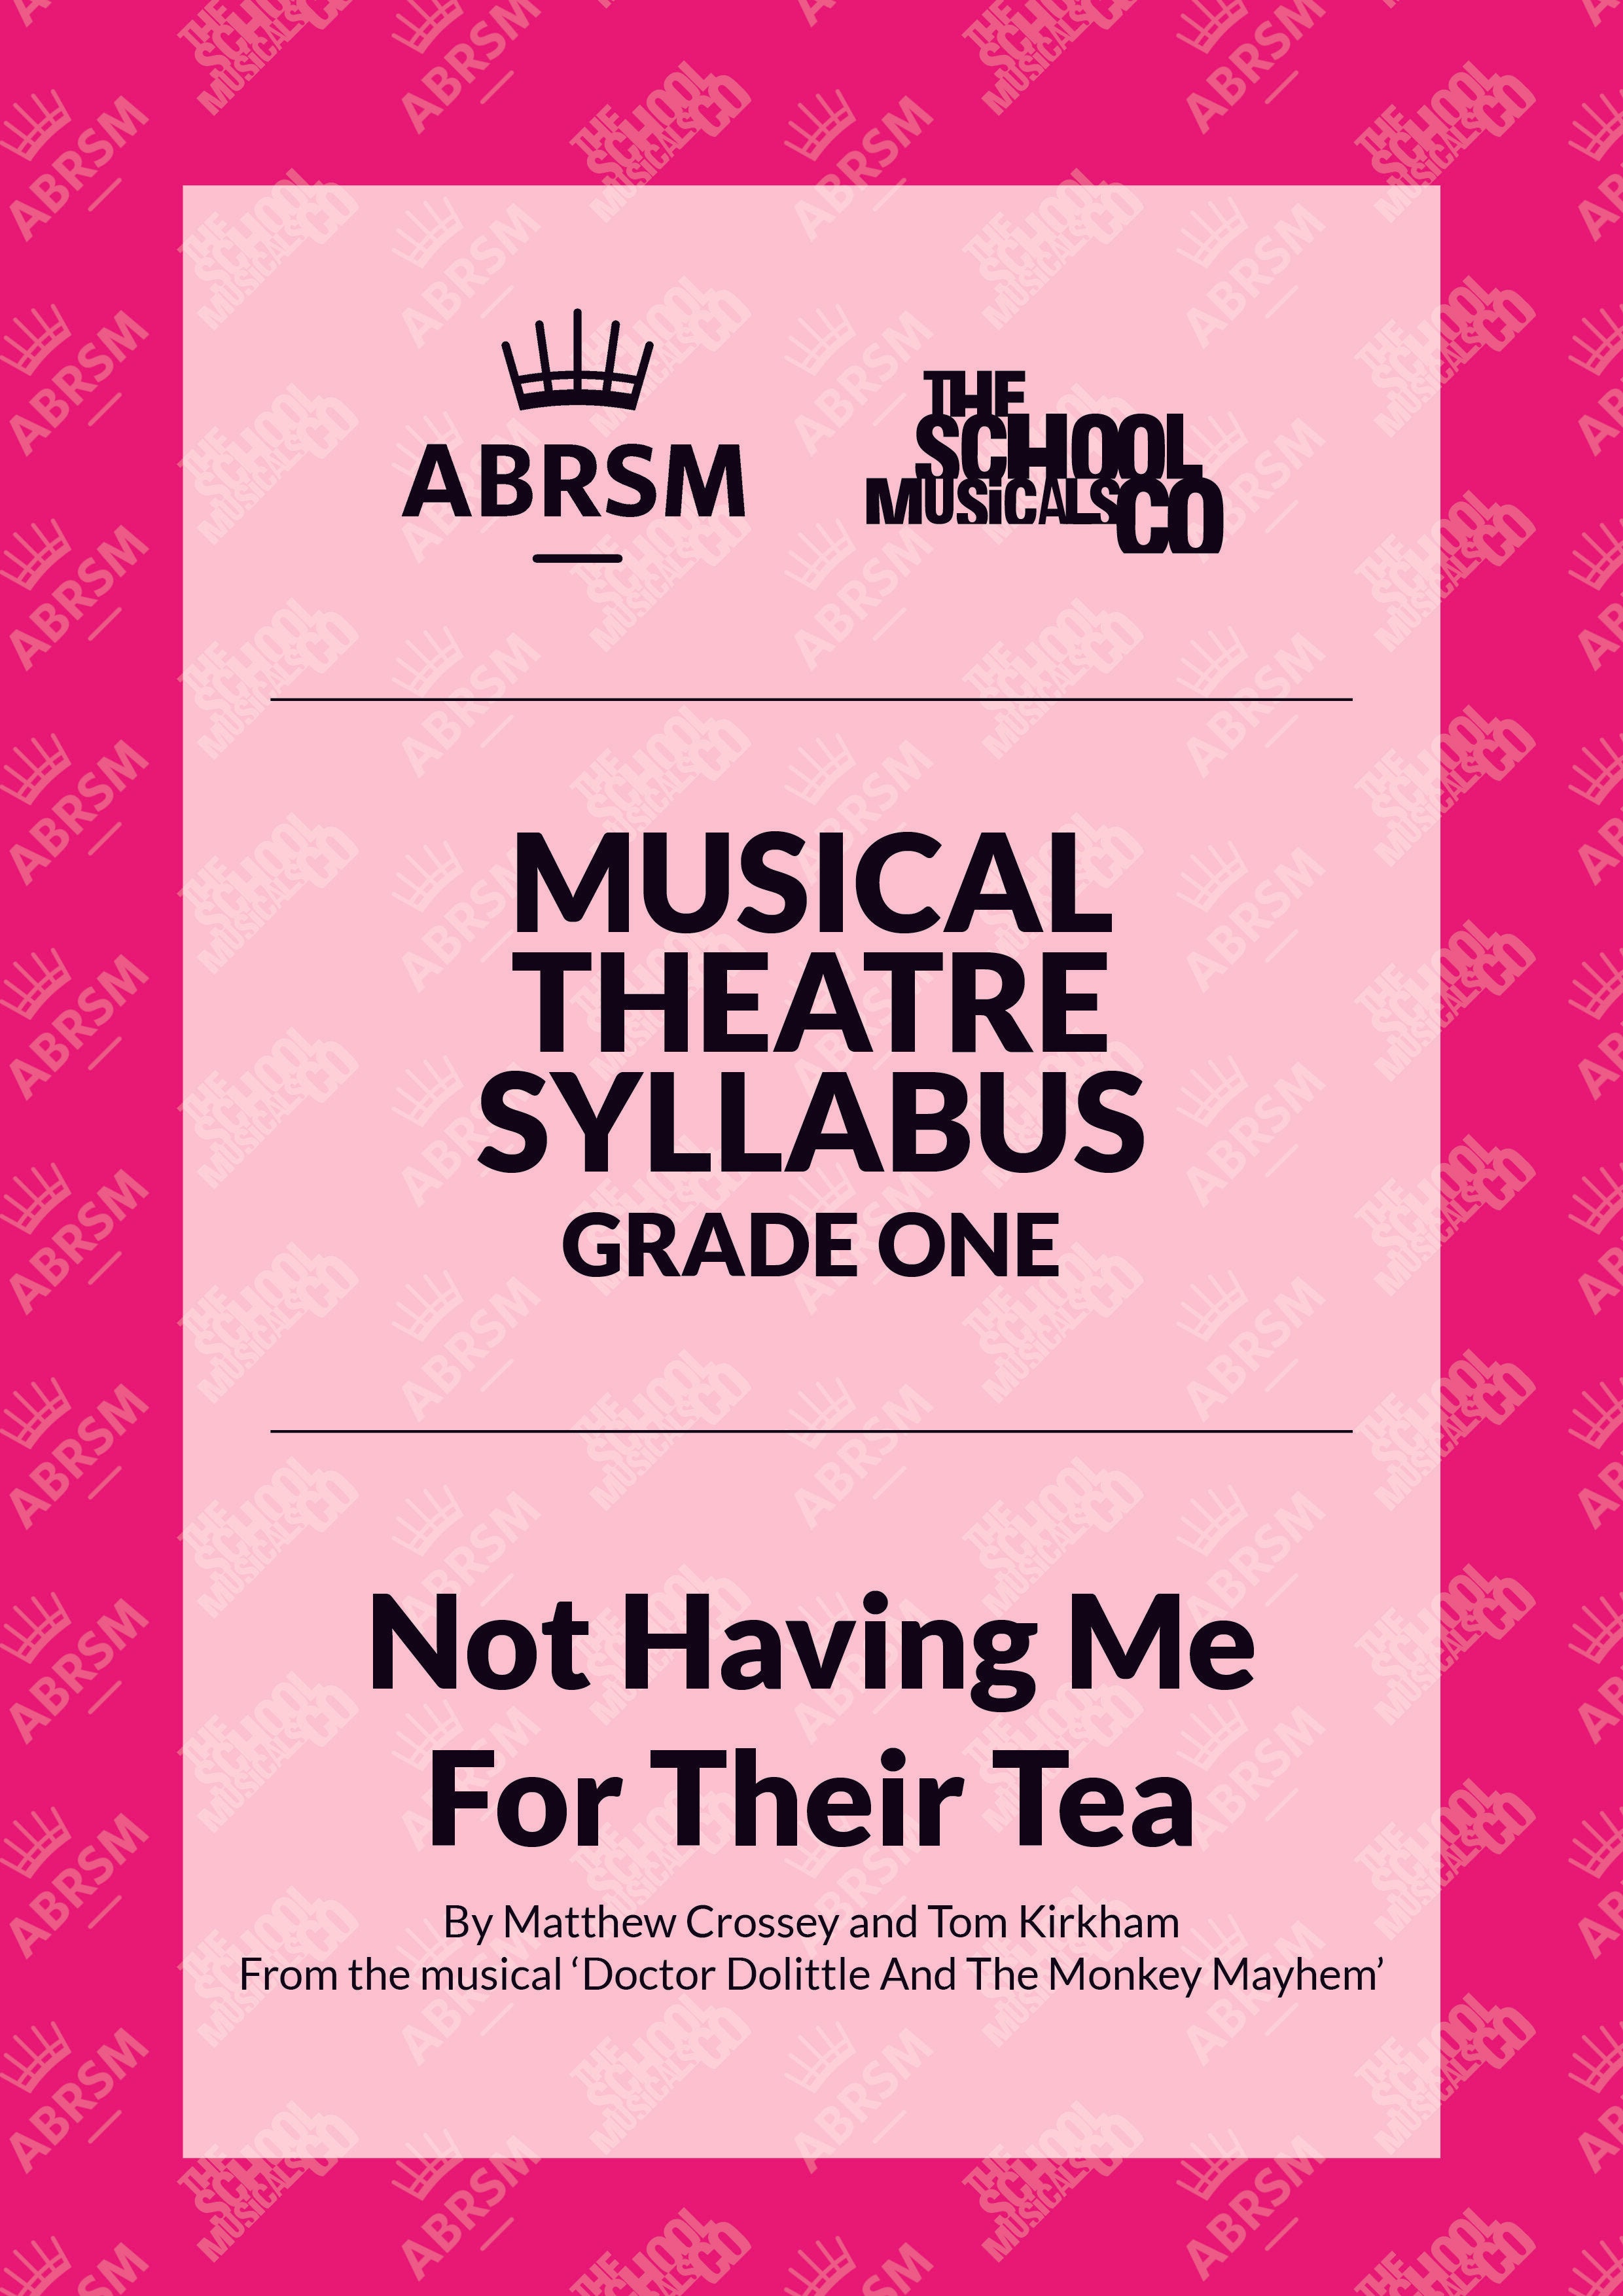 Not Having Me For Their Tea - ABRSM Musical Theatre Syllabus Grade One